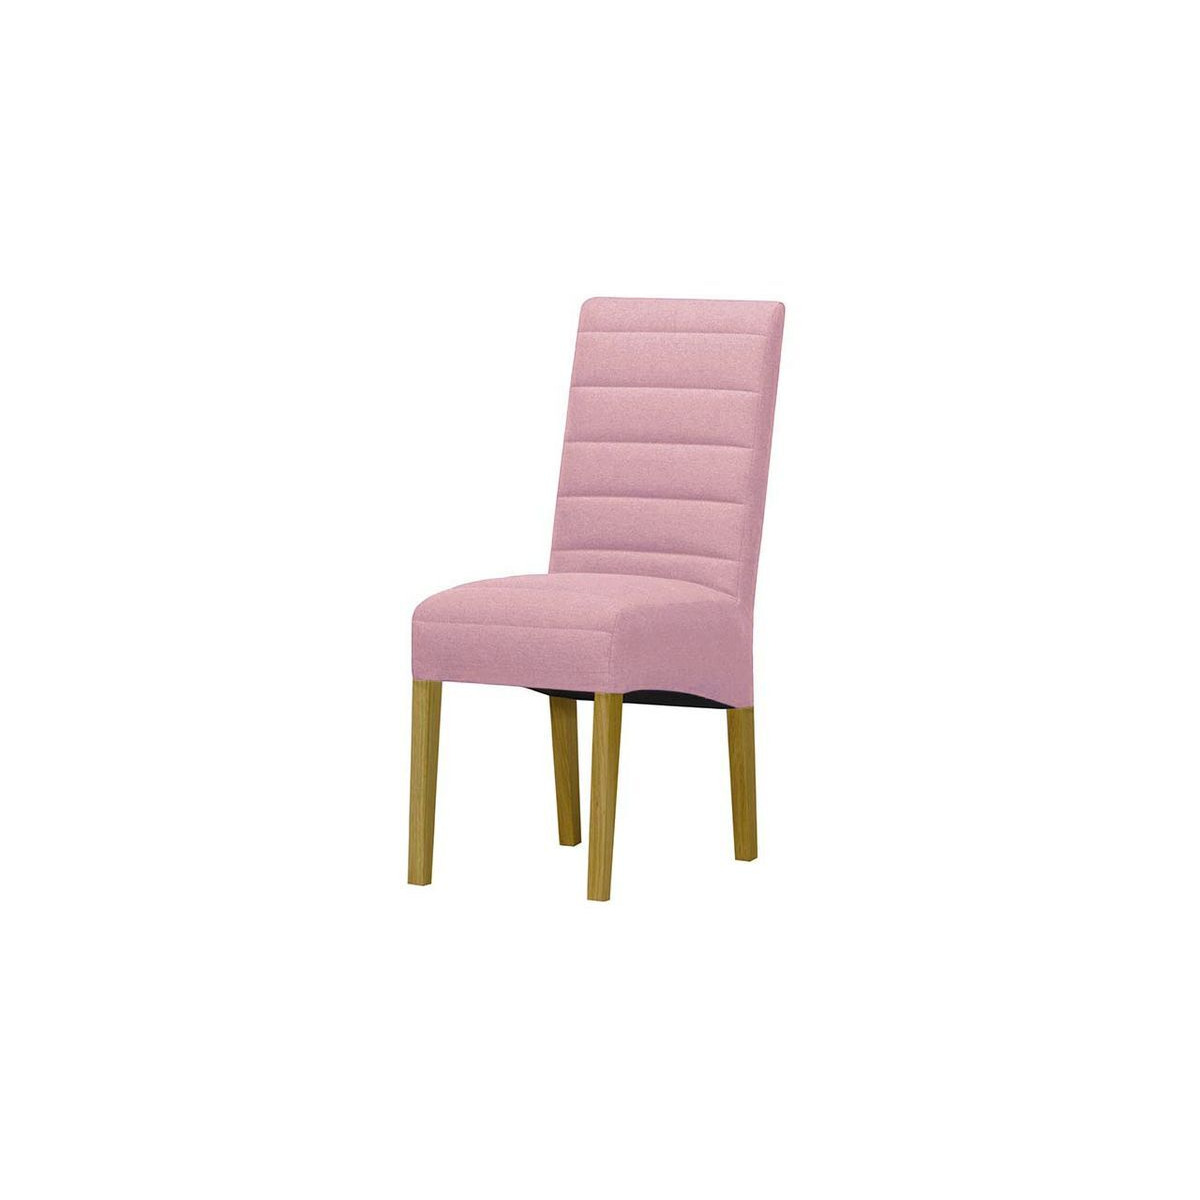 Sonitag Dining Chair, pink, Leg colour: like oak - image 1